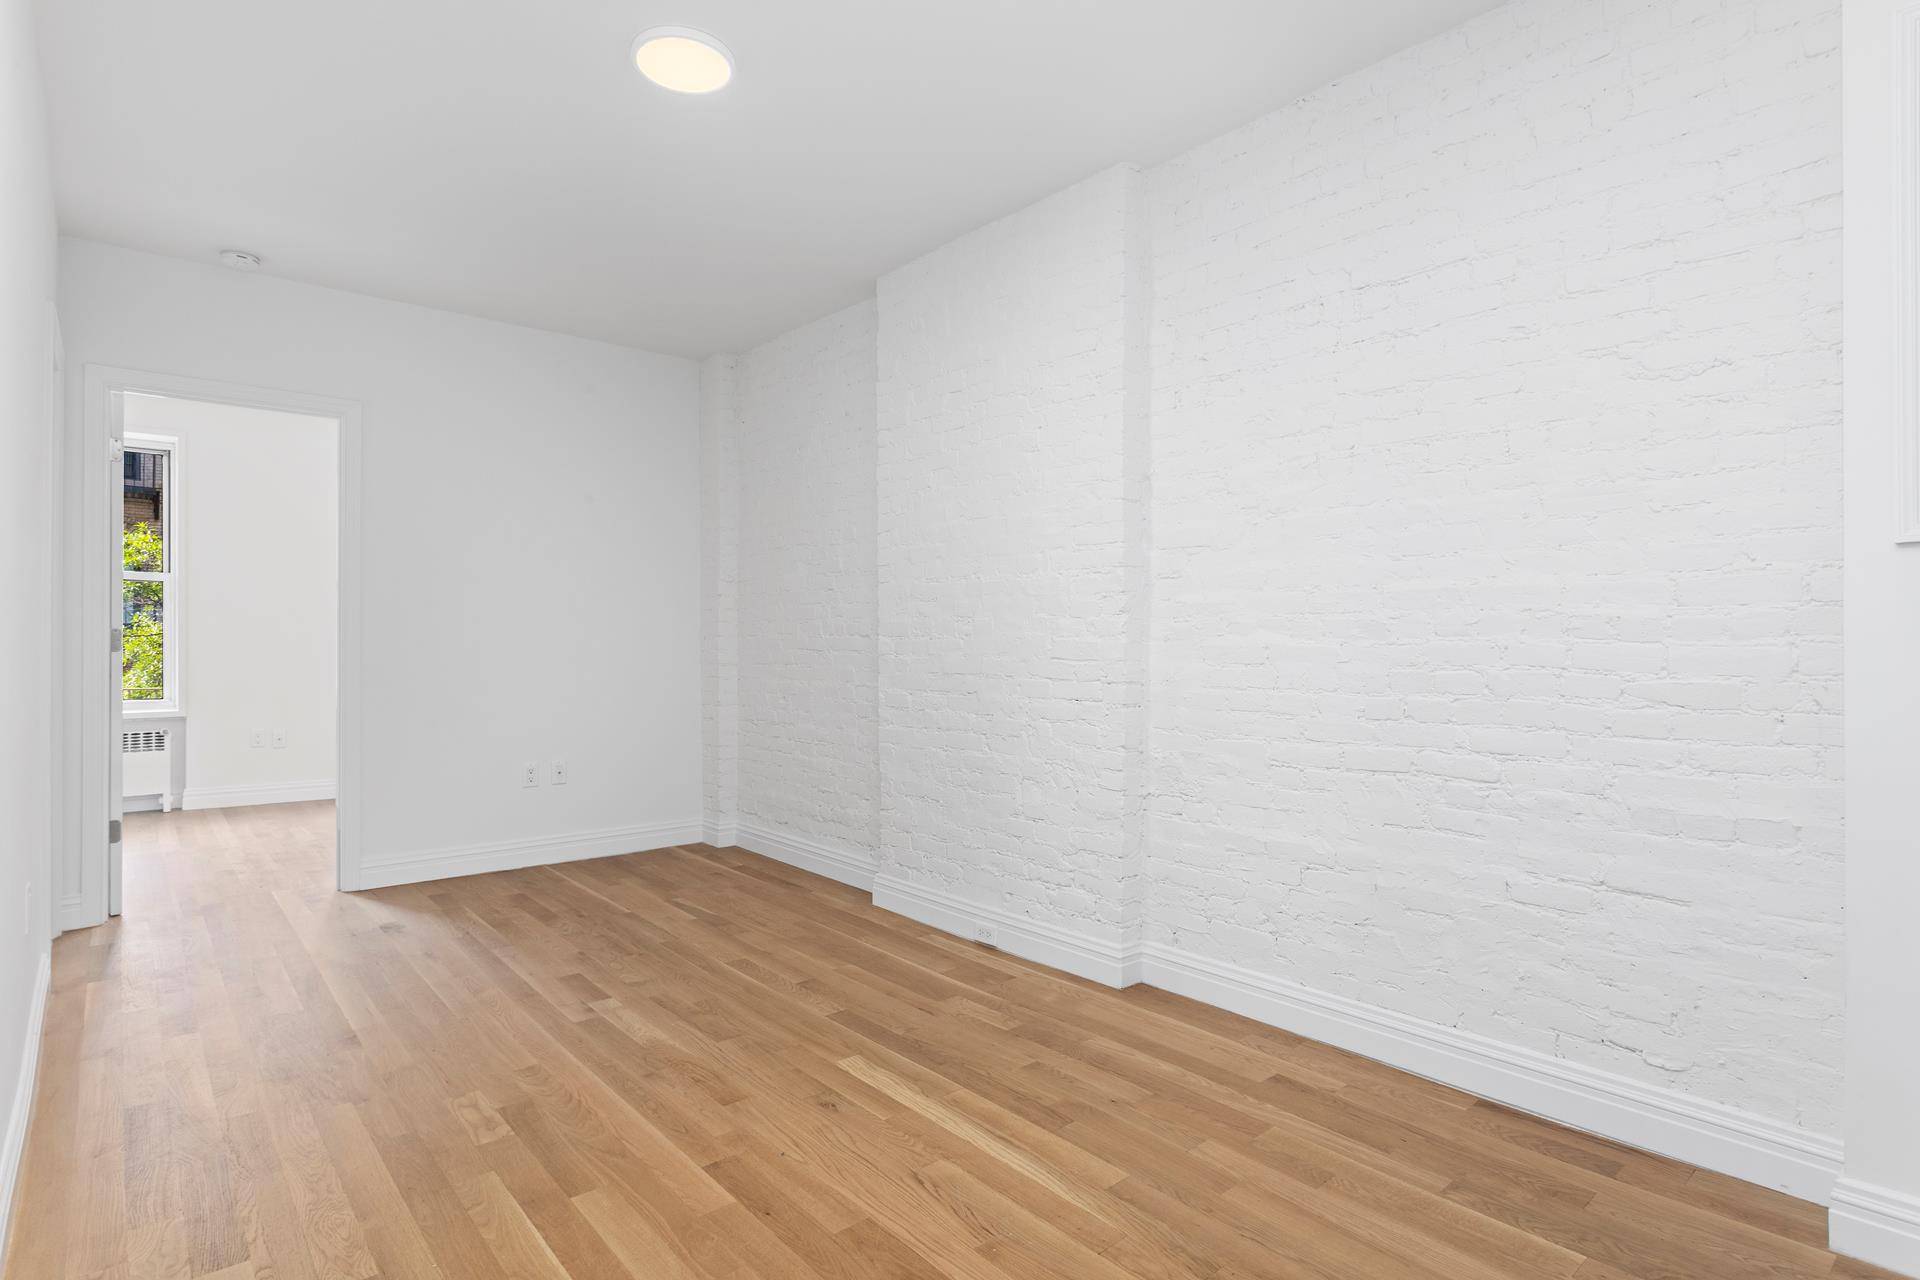 Move right into this newly renovated Two Bedroom, two bath apartment with its sun flooded south facing windows, hardwood oak floors and white stained exposed brick !